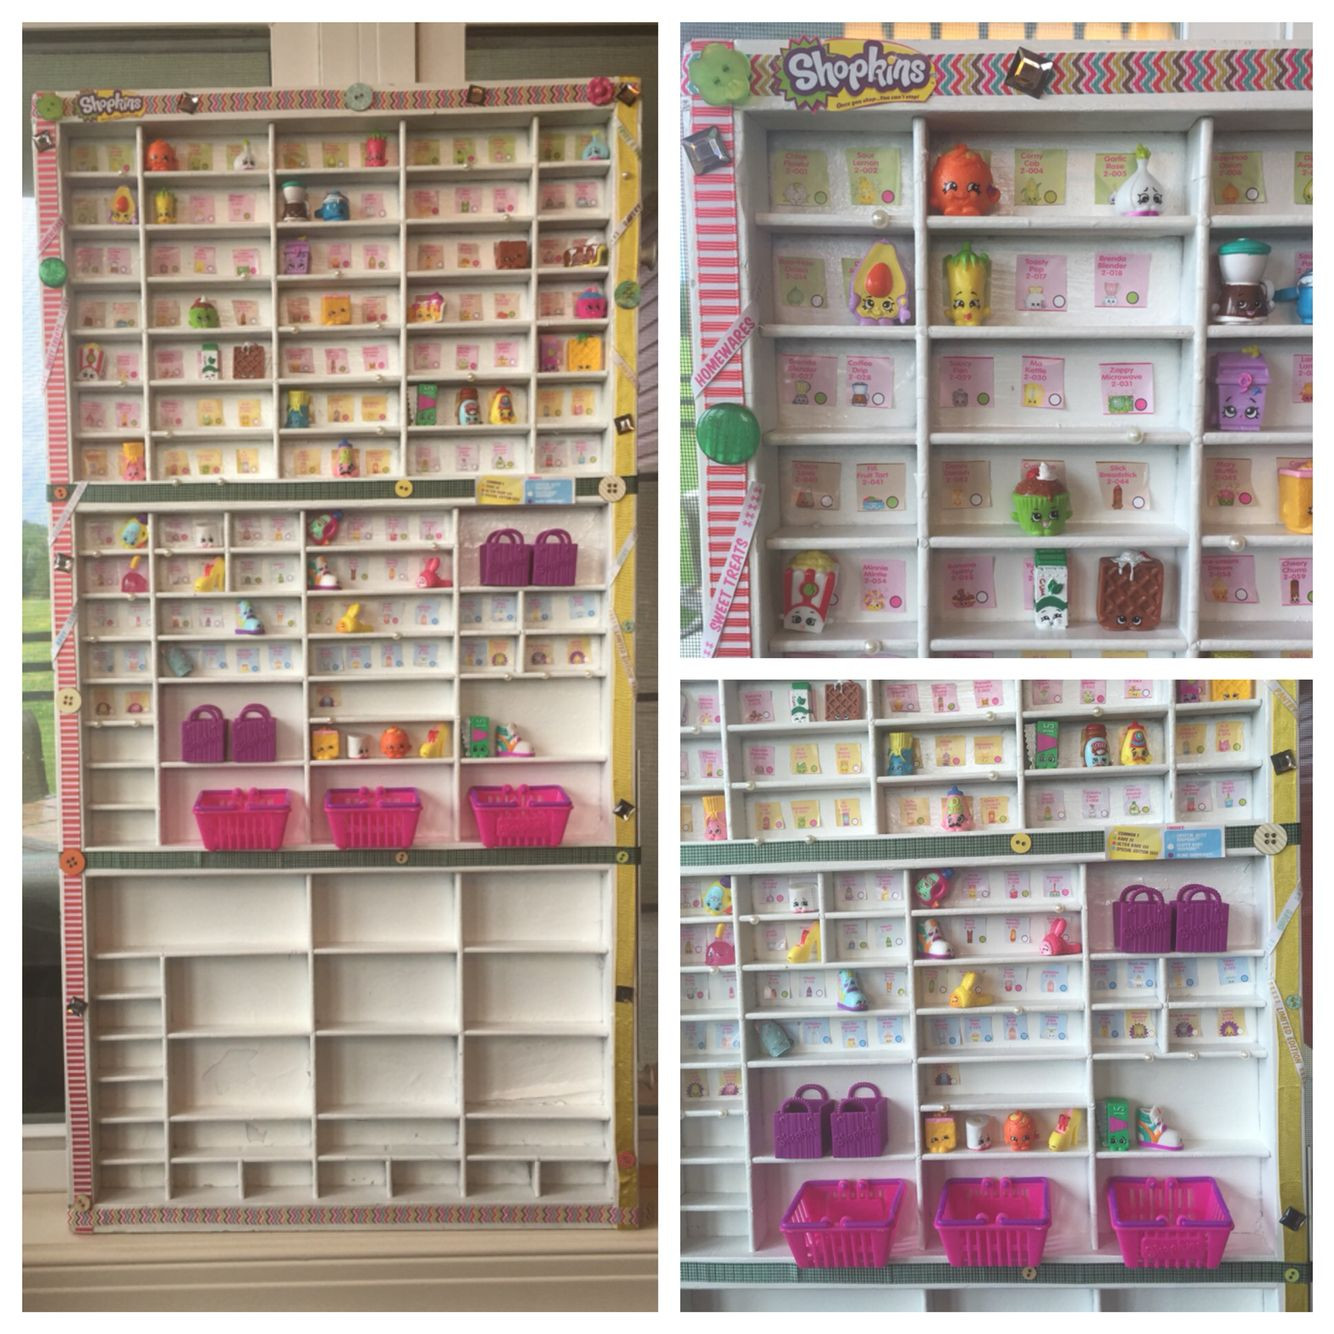 Shopkins Organizer DIY
 Shopkins display homemade from and antique drawer